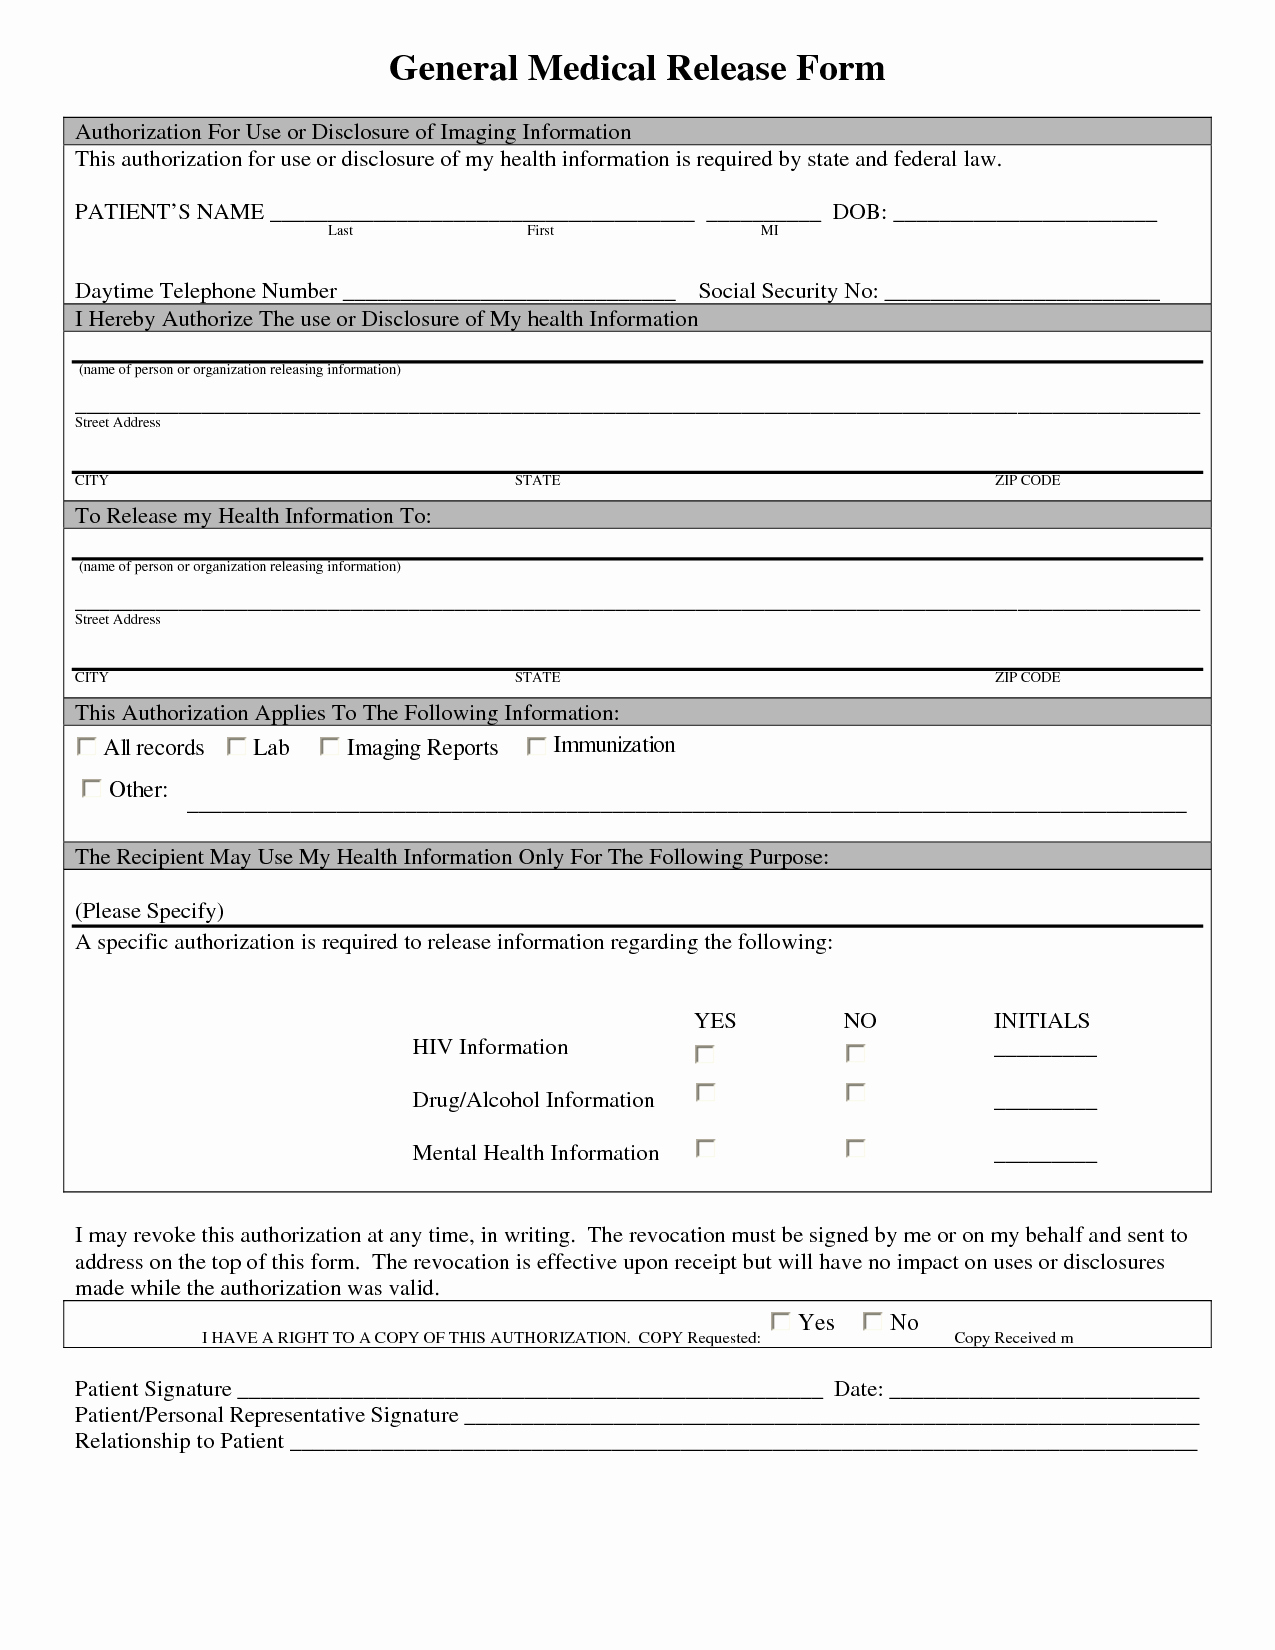 Medication Release form Template Luxury Generic Medical Release form